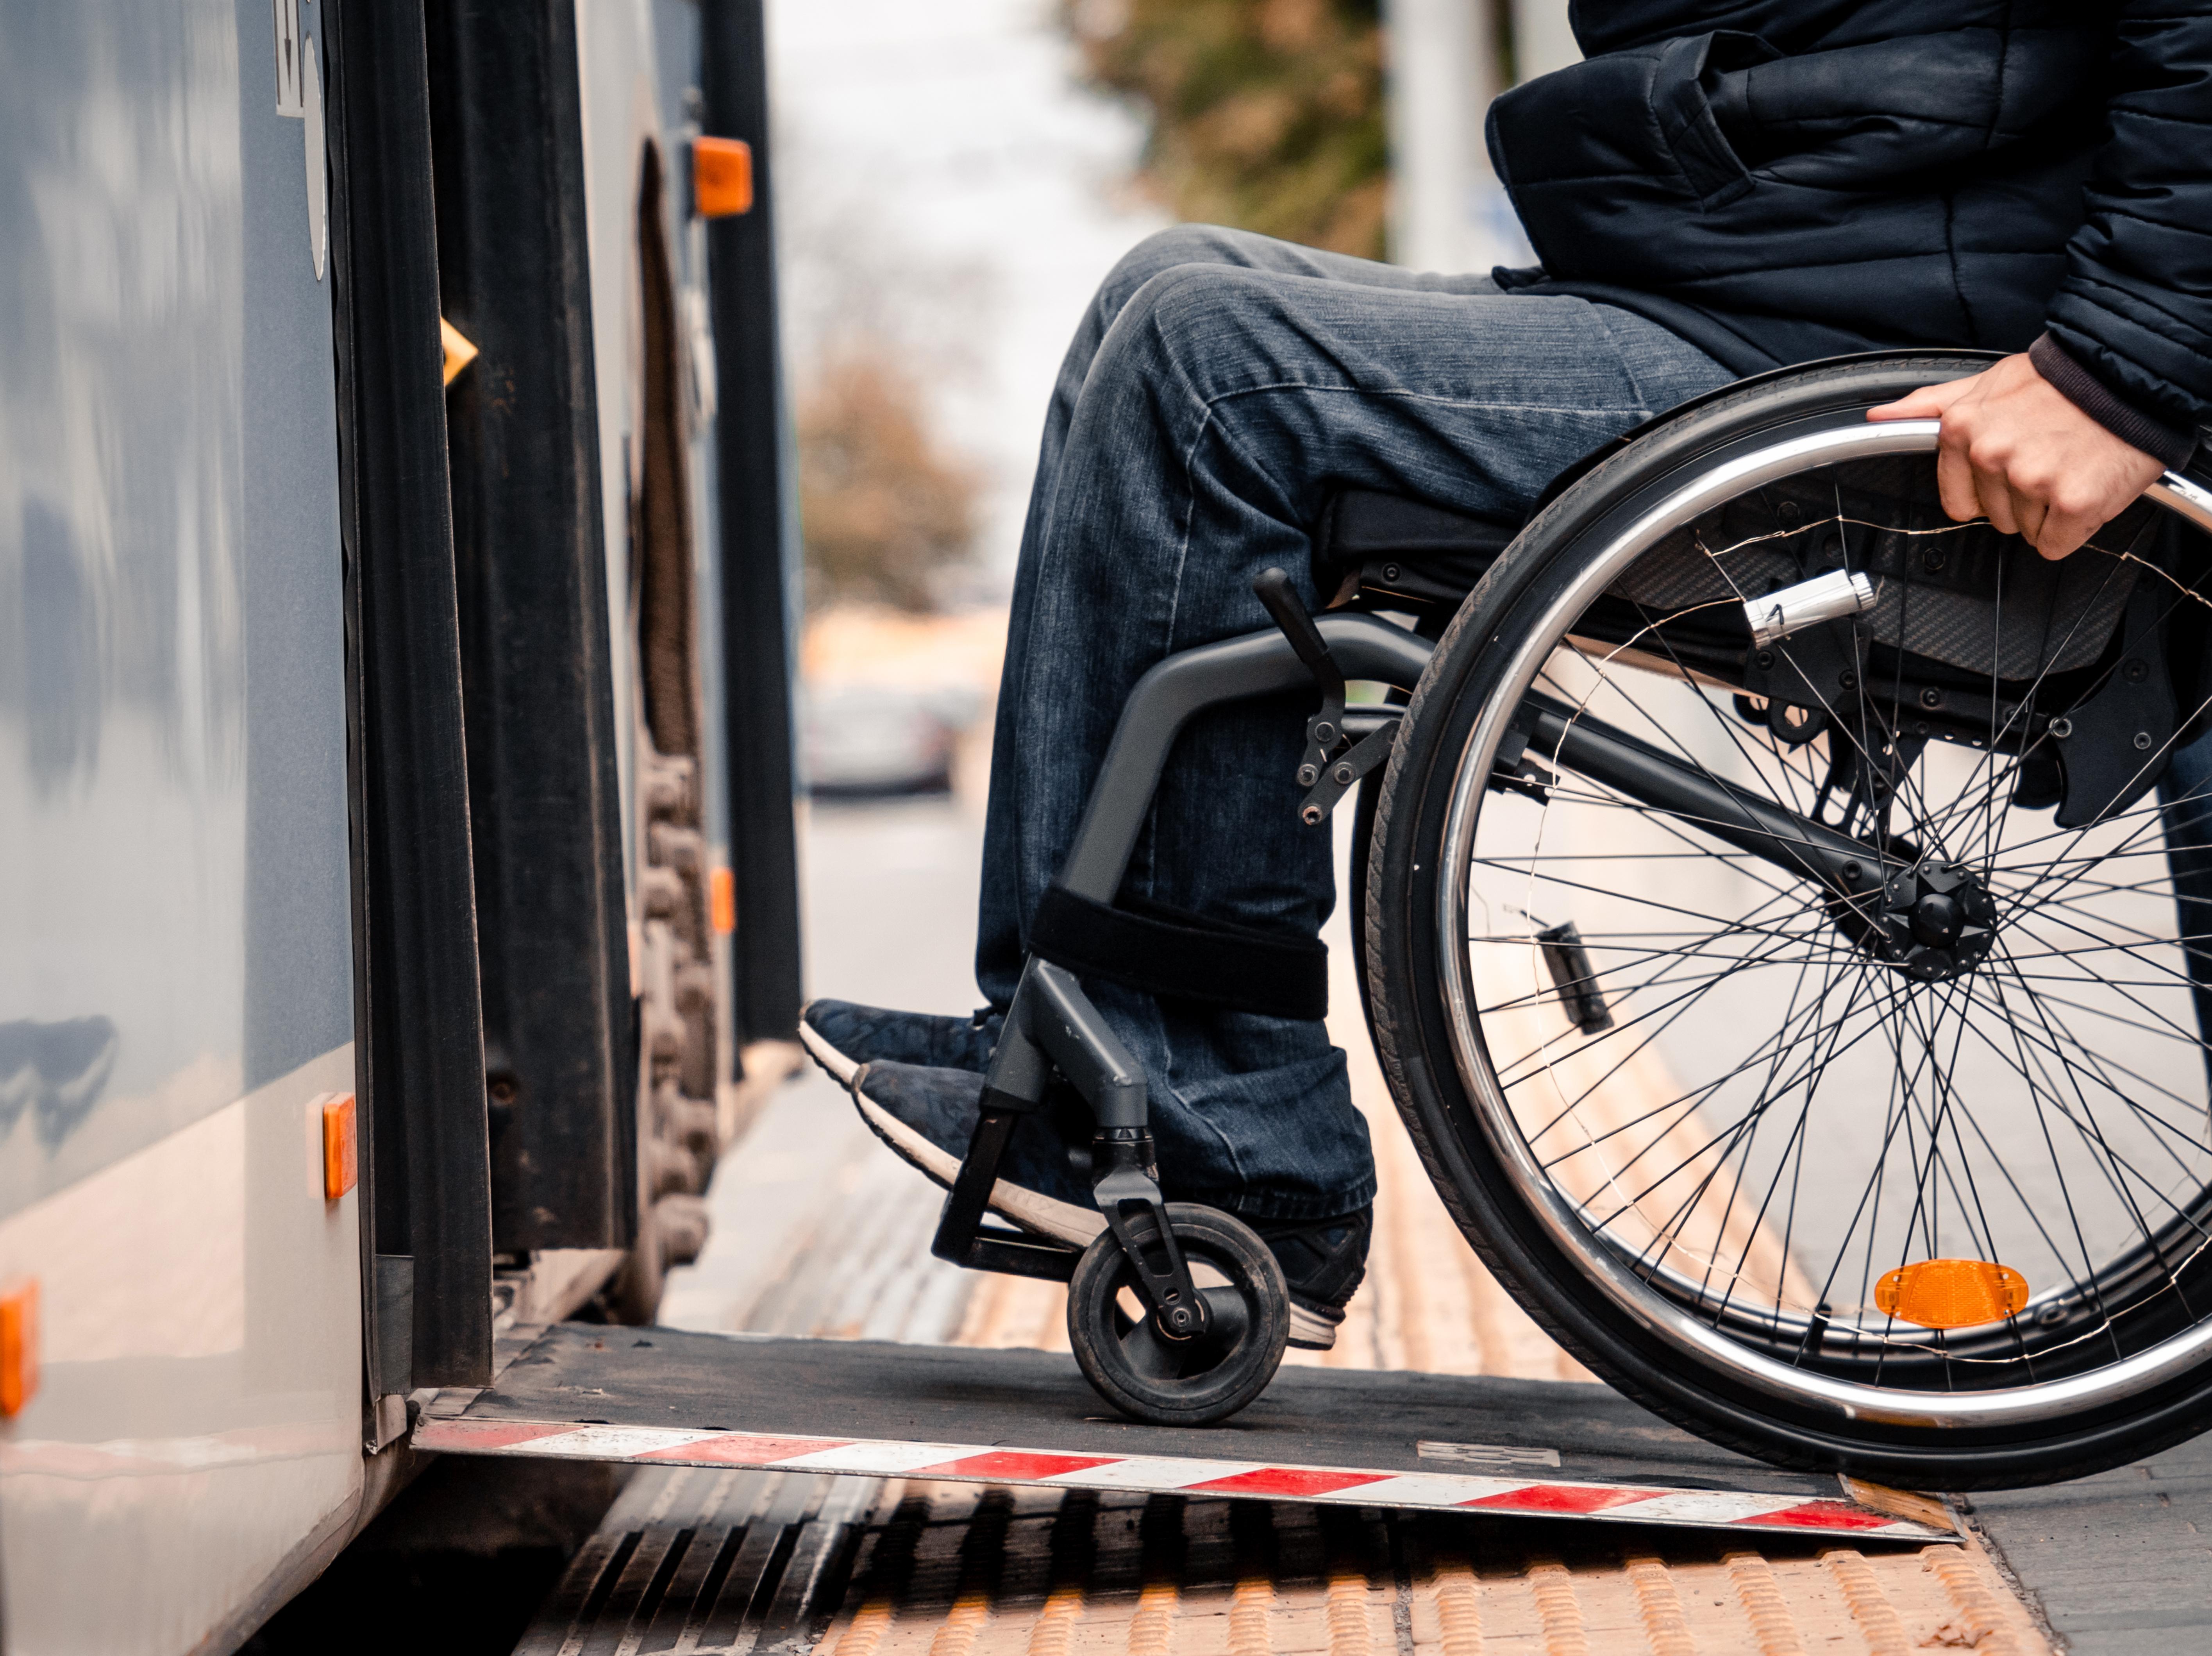 a person in a wheel chair boards a bus